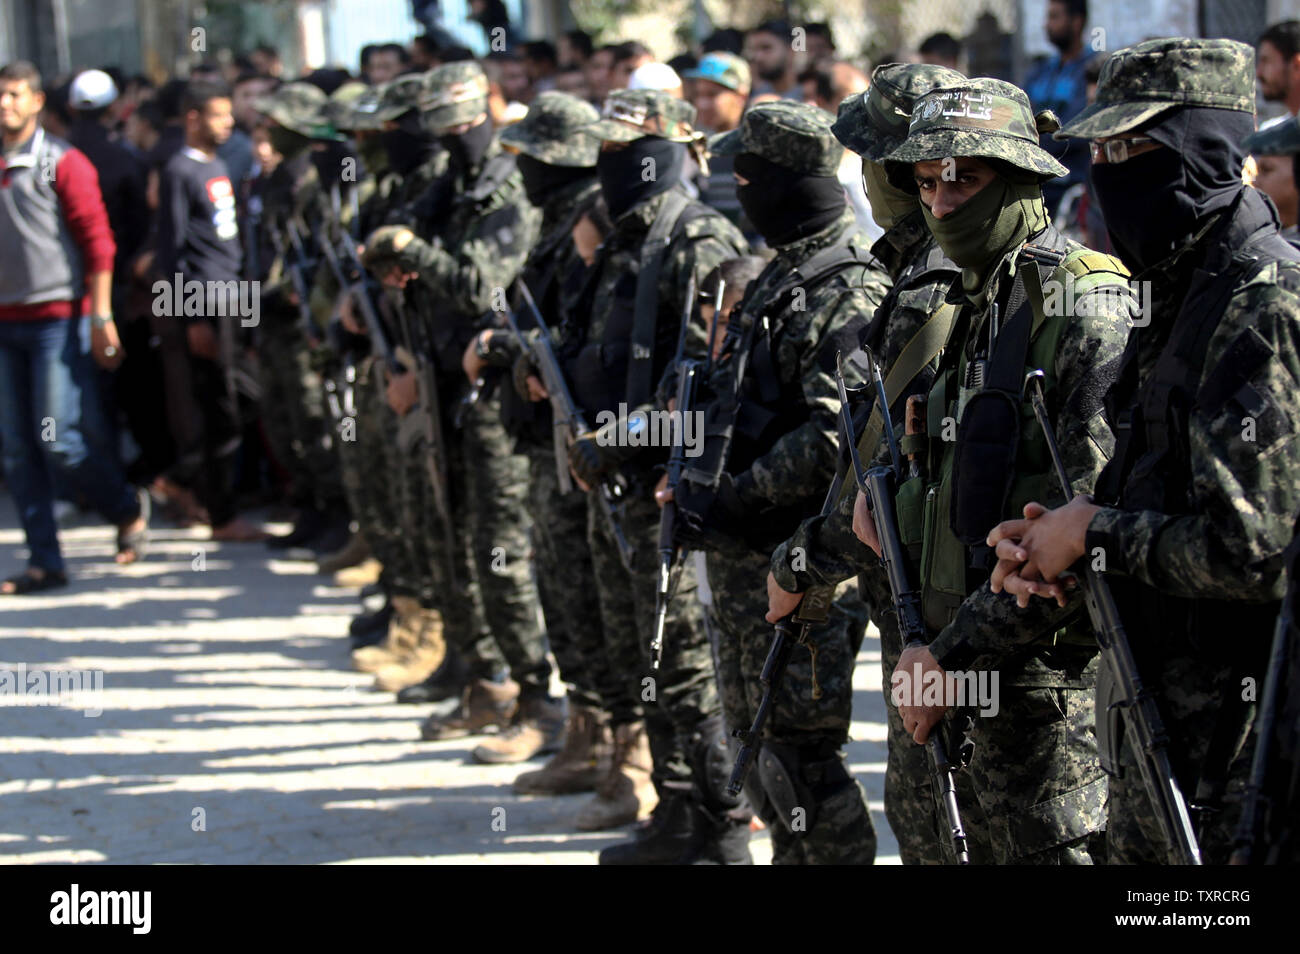 Palestinian Militants Of The Islamist Movement Hamas Military Wing Al Qassam Brigades Attend The Funeral Of